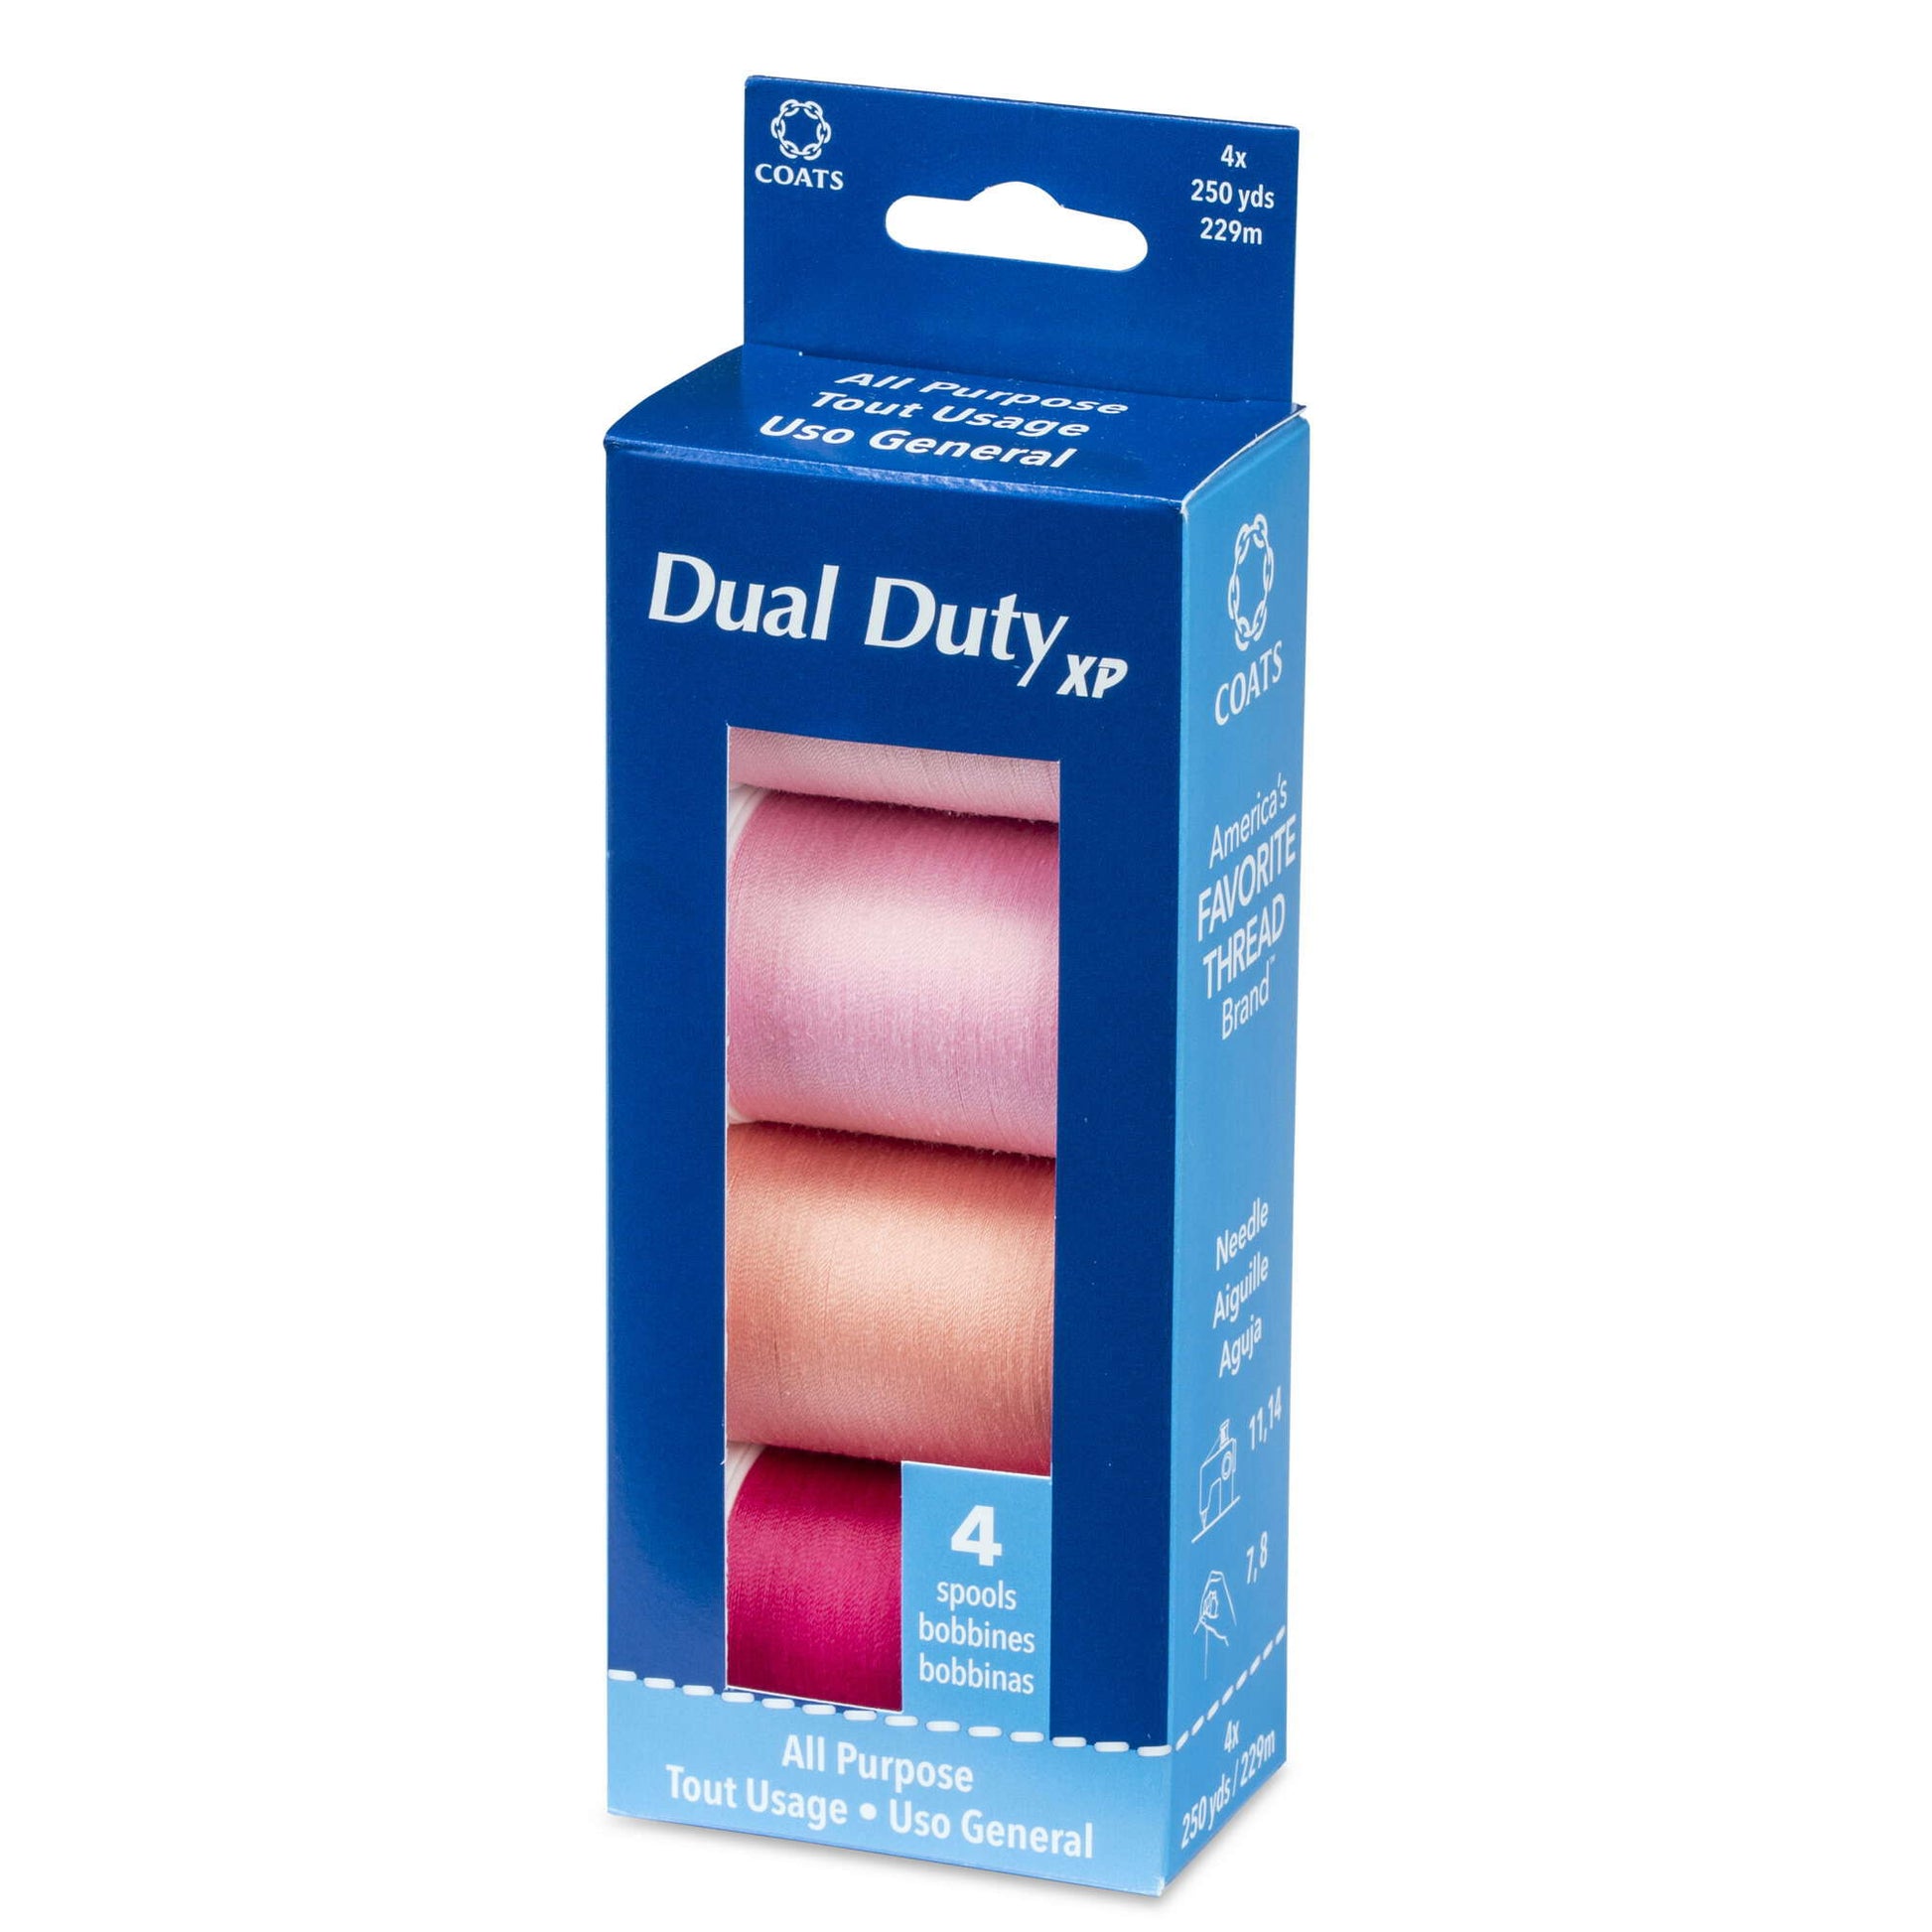 Dual Duty XP All Purpose Sewing Thread, 4 Spools Pinks